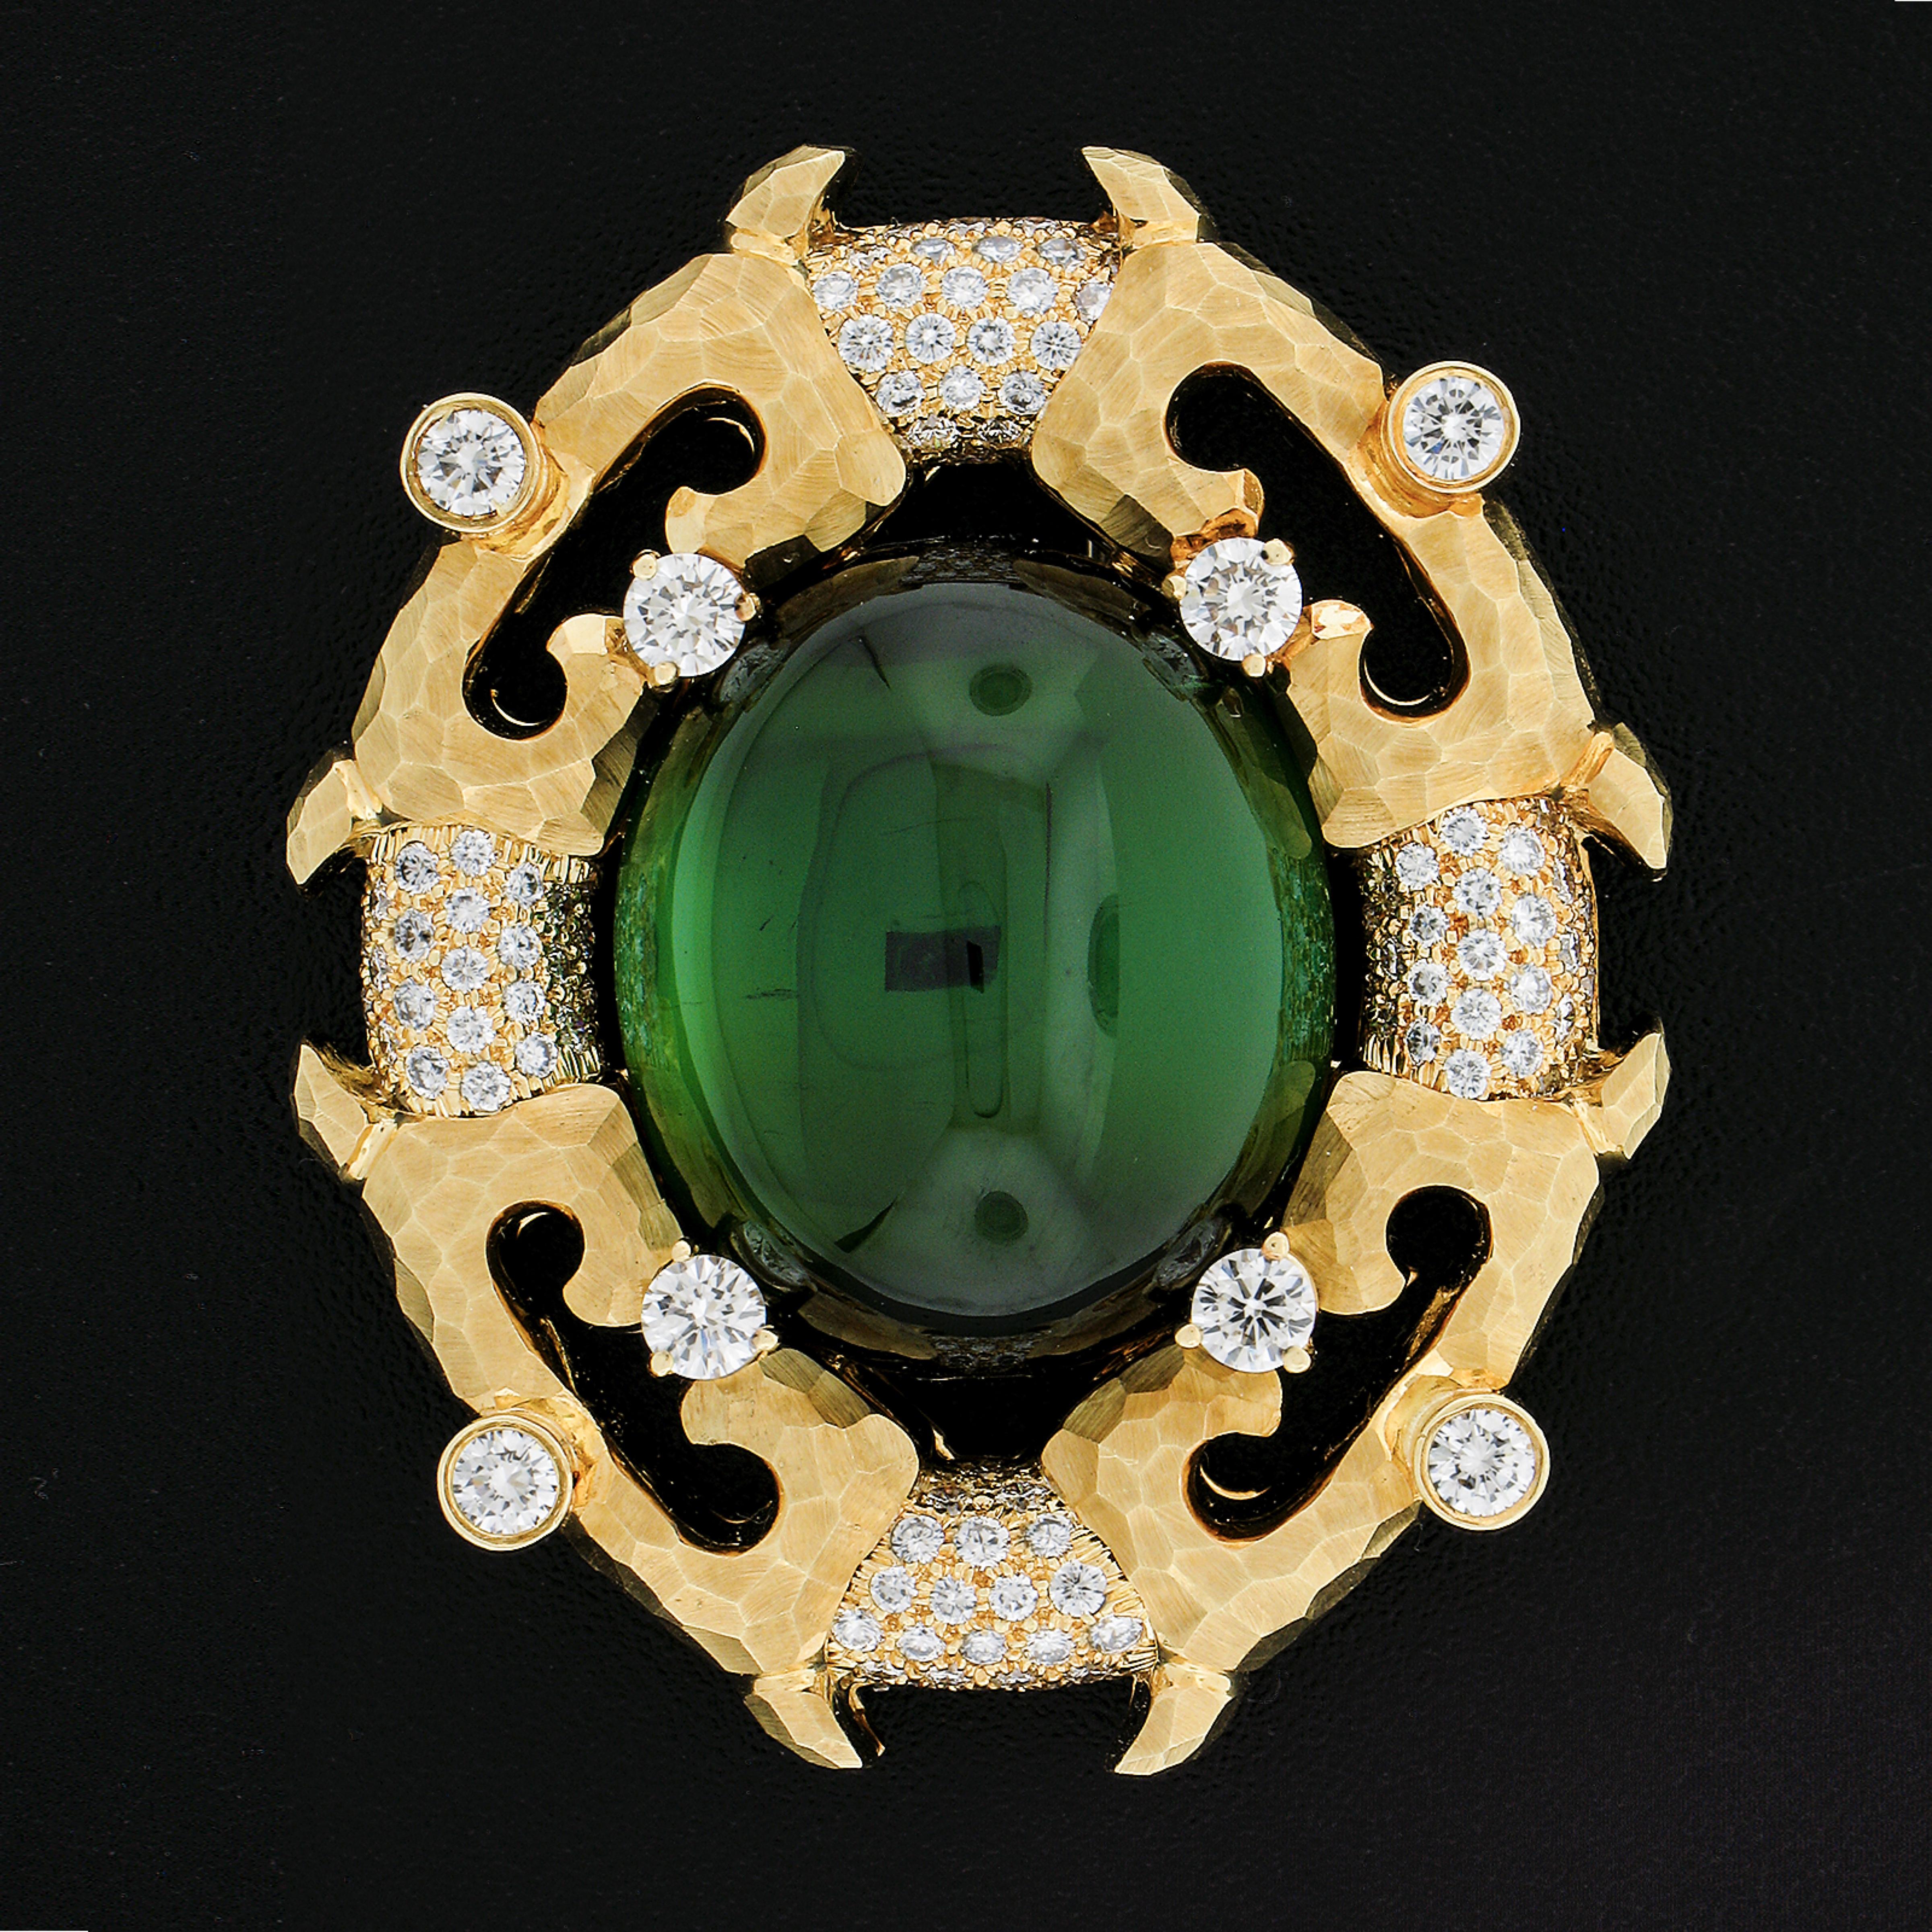 Henry Dunay is known for quality gemstones, diamonds and Gold finishing. All that is on full display with this magnificent work of Art. The center Green Tourmaline is clean and vivid in color. It is accented by various colorless ideal diamonds.